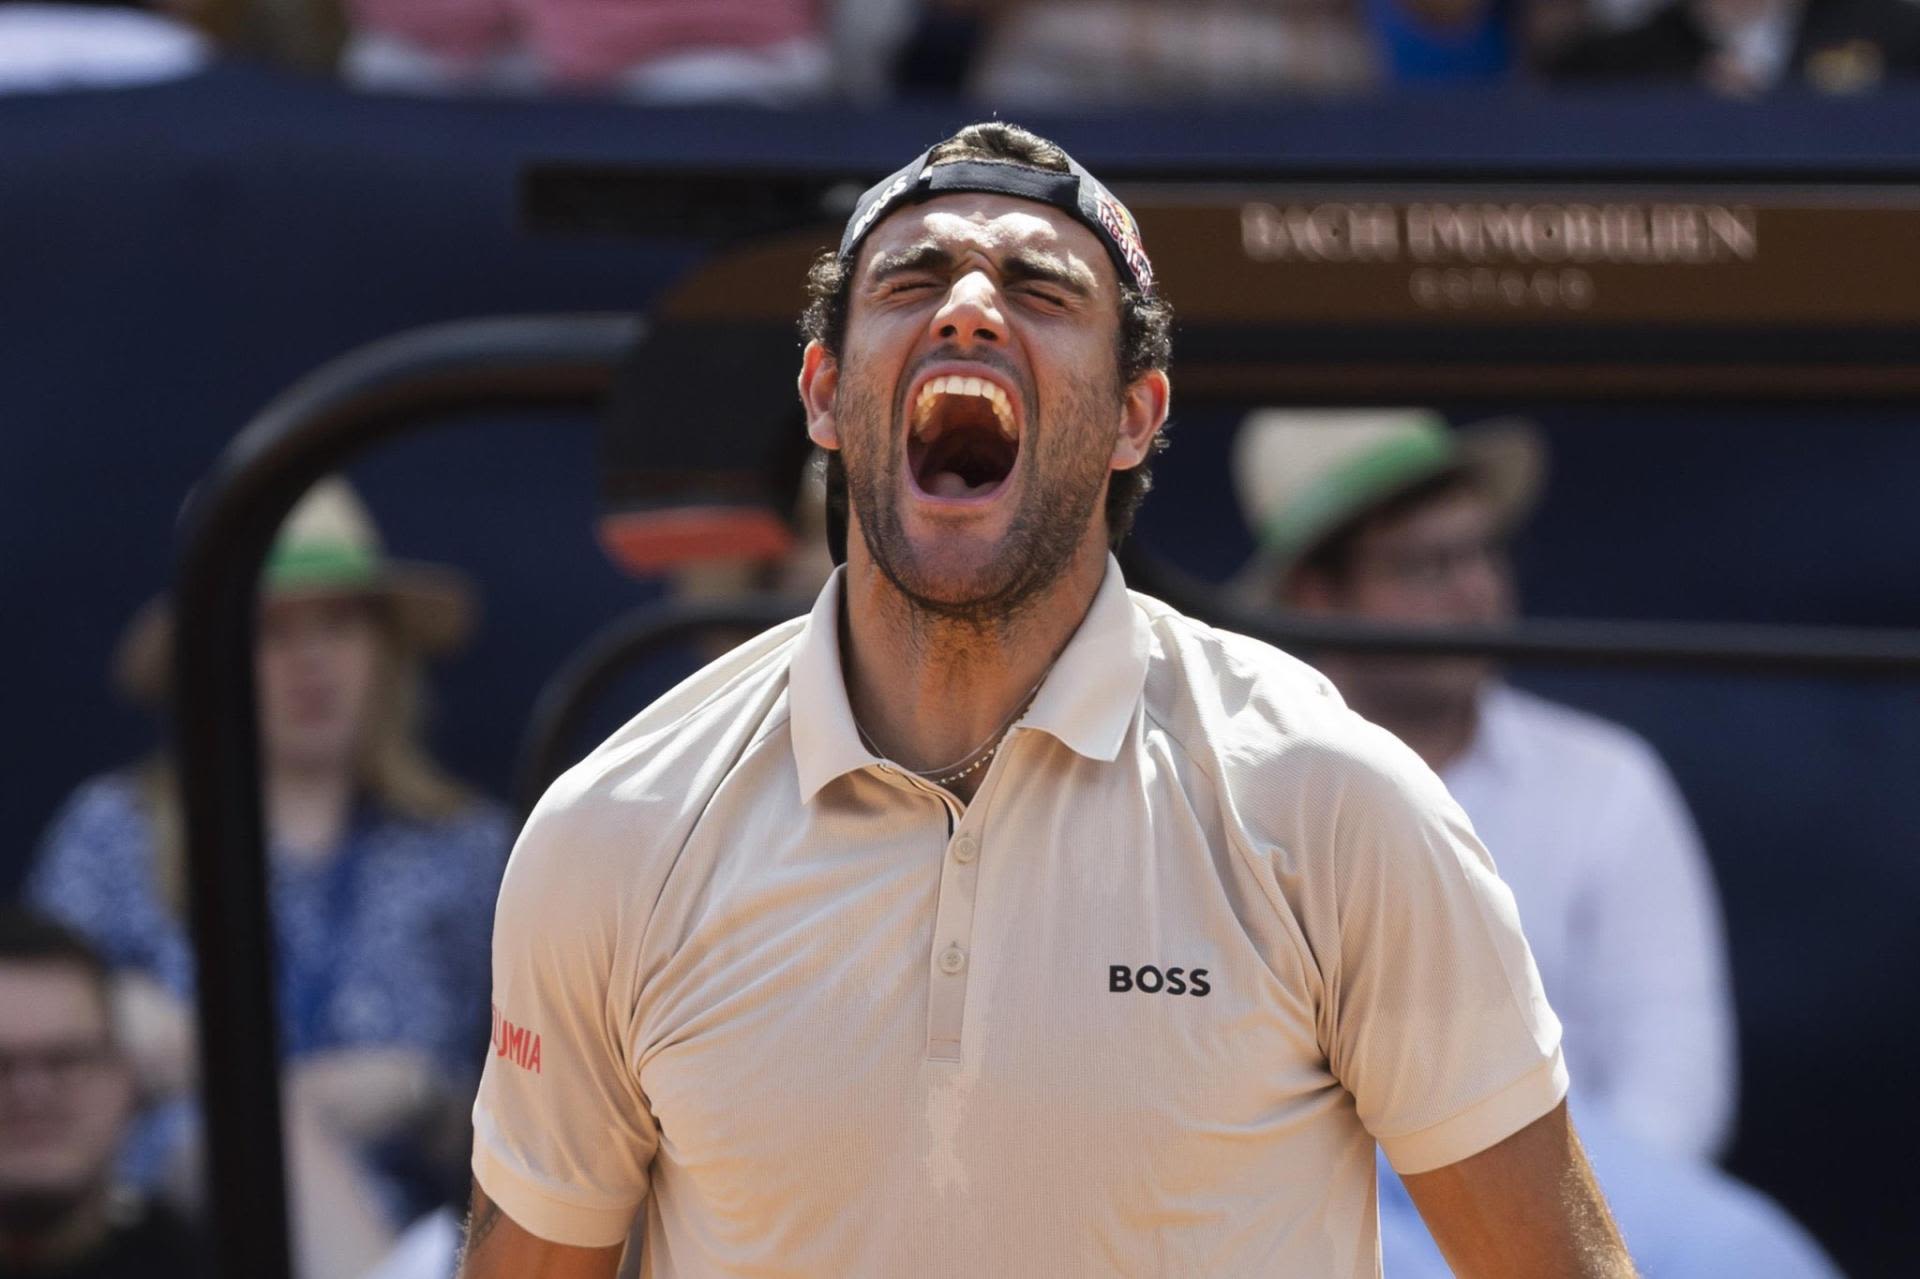 Matteo Berrettini triumphs in Gstaad and confesses fears of early season